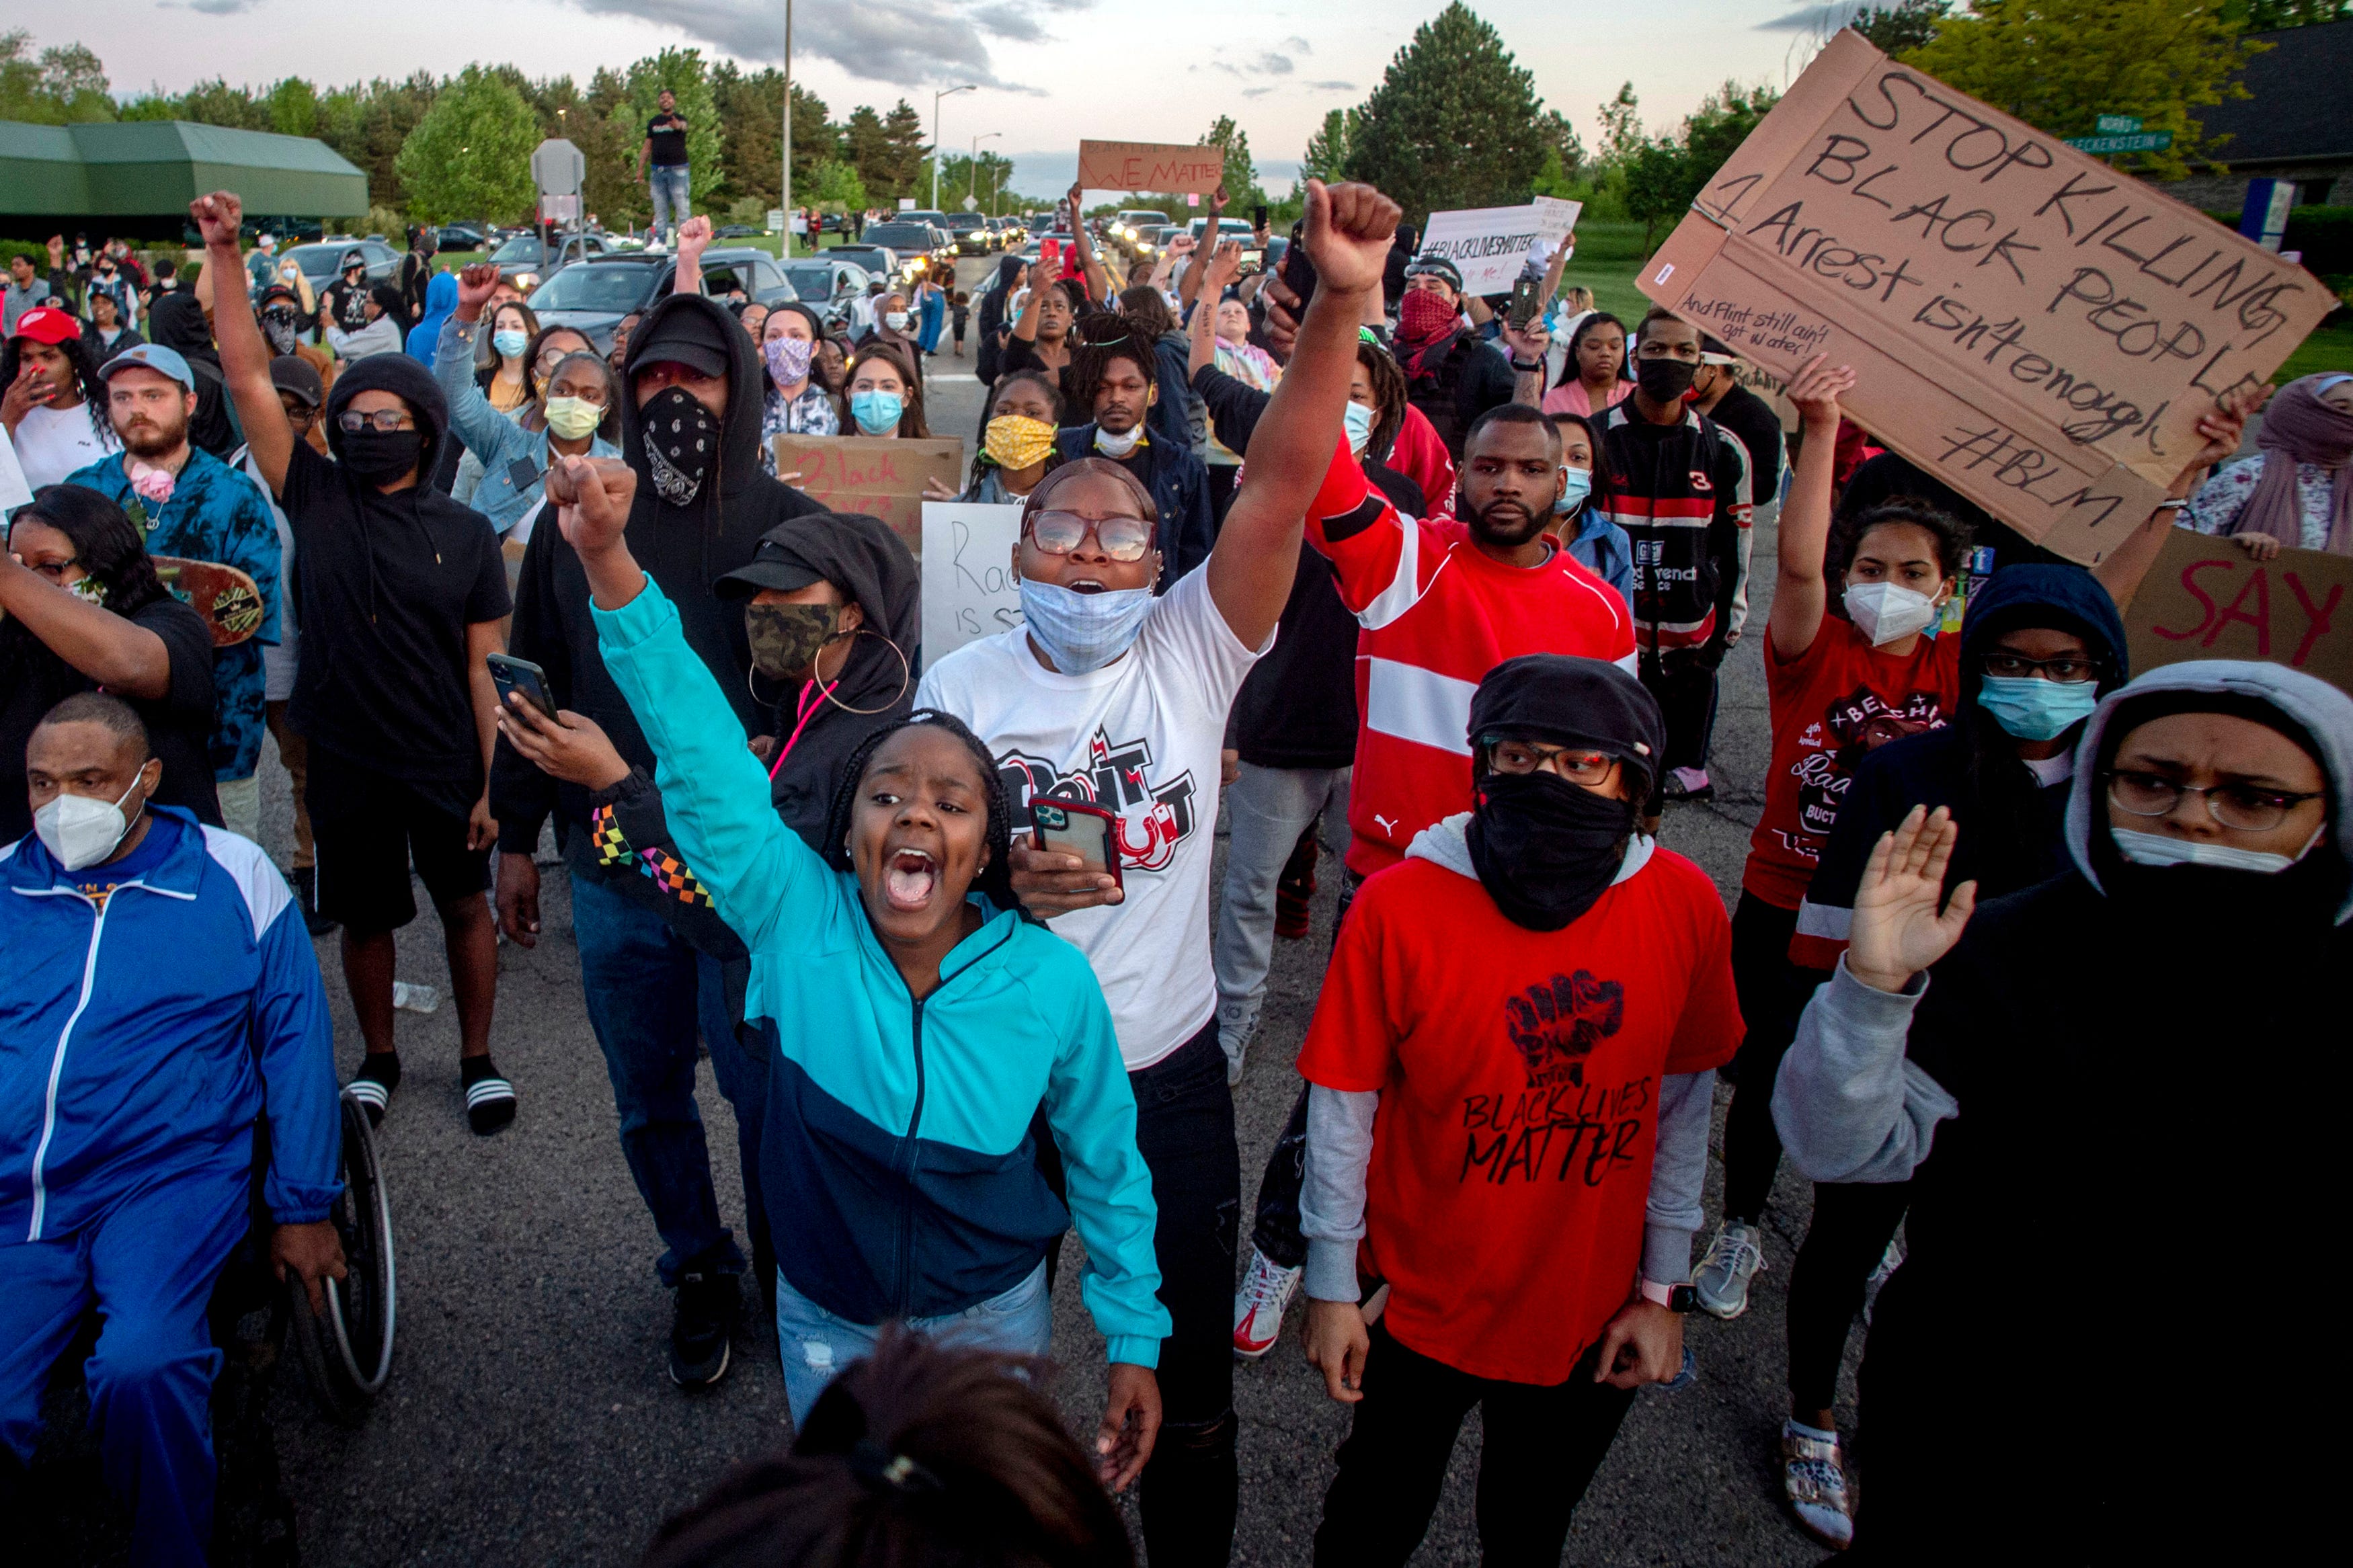 Protesters march during a peaceful protest in Flint, seeking justice for George Floyd.